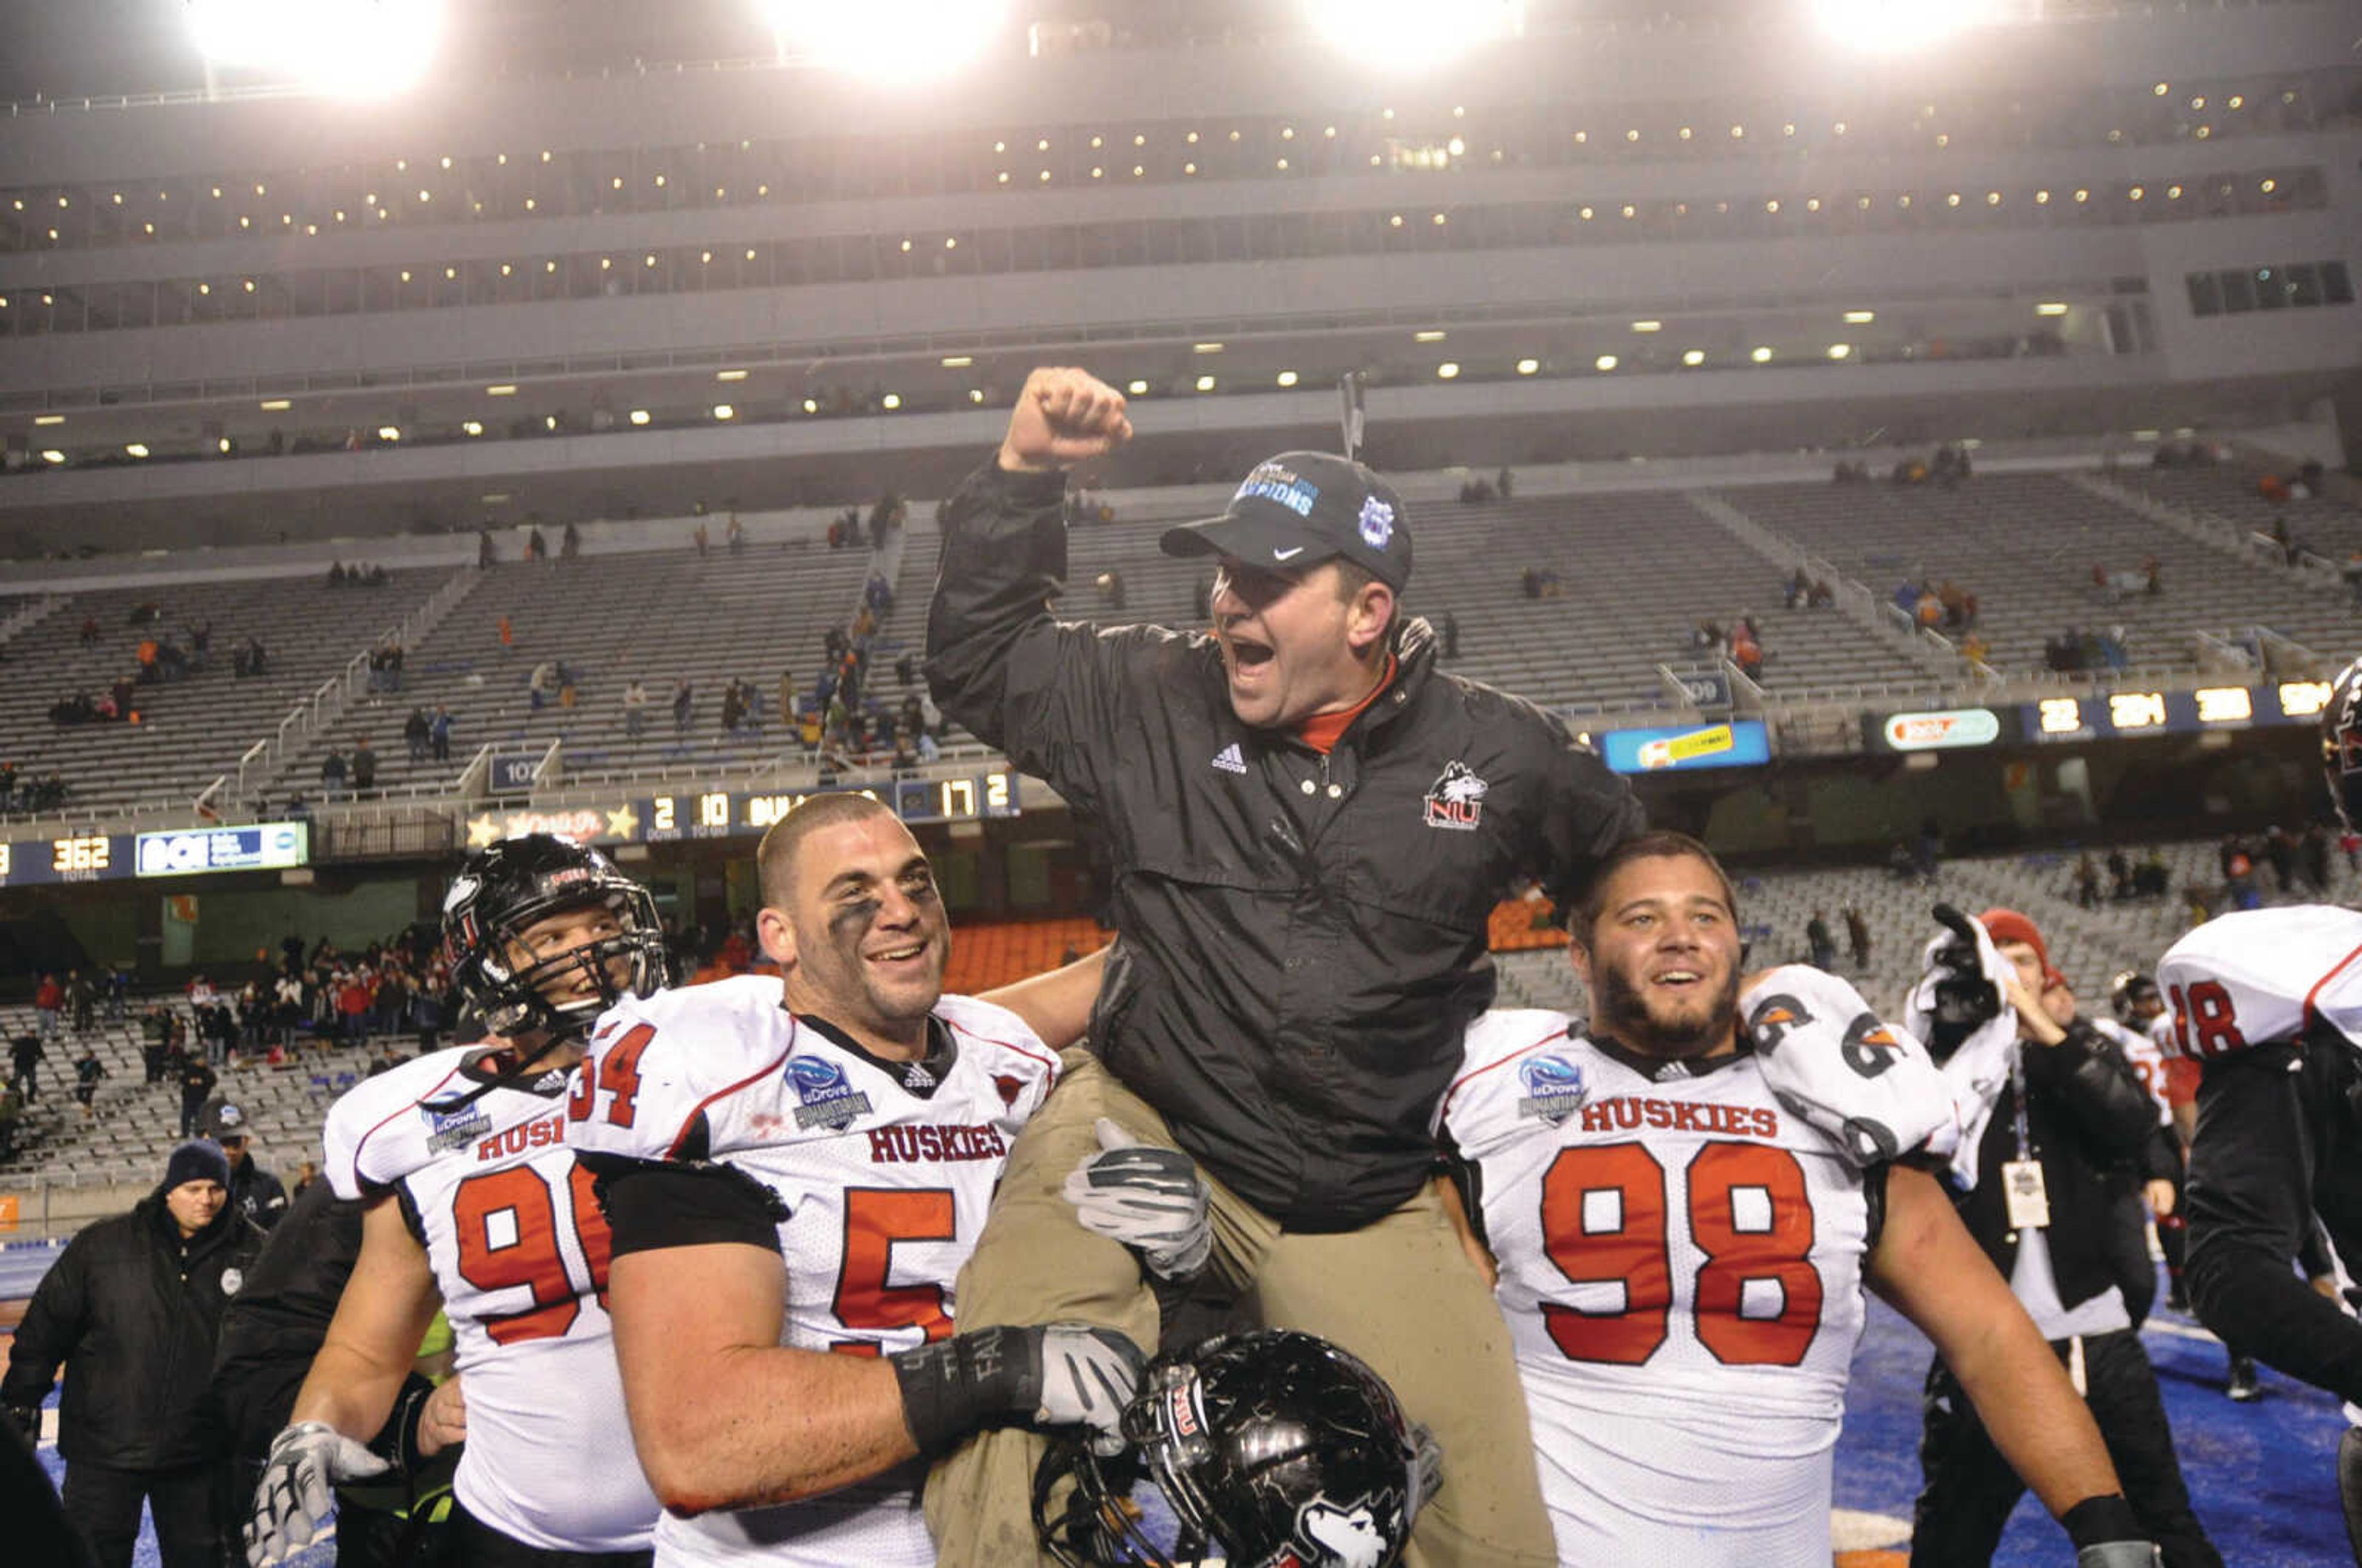 NIU Husky players lift up Tom Matukewicz after their win at the Humanitarian Bowl in 2010. Photo by Charlie Litchfield courtesy of Idaho Press Tribune.